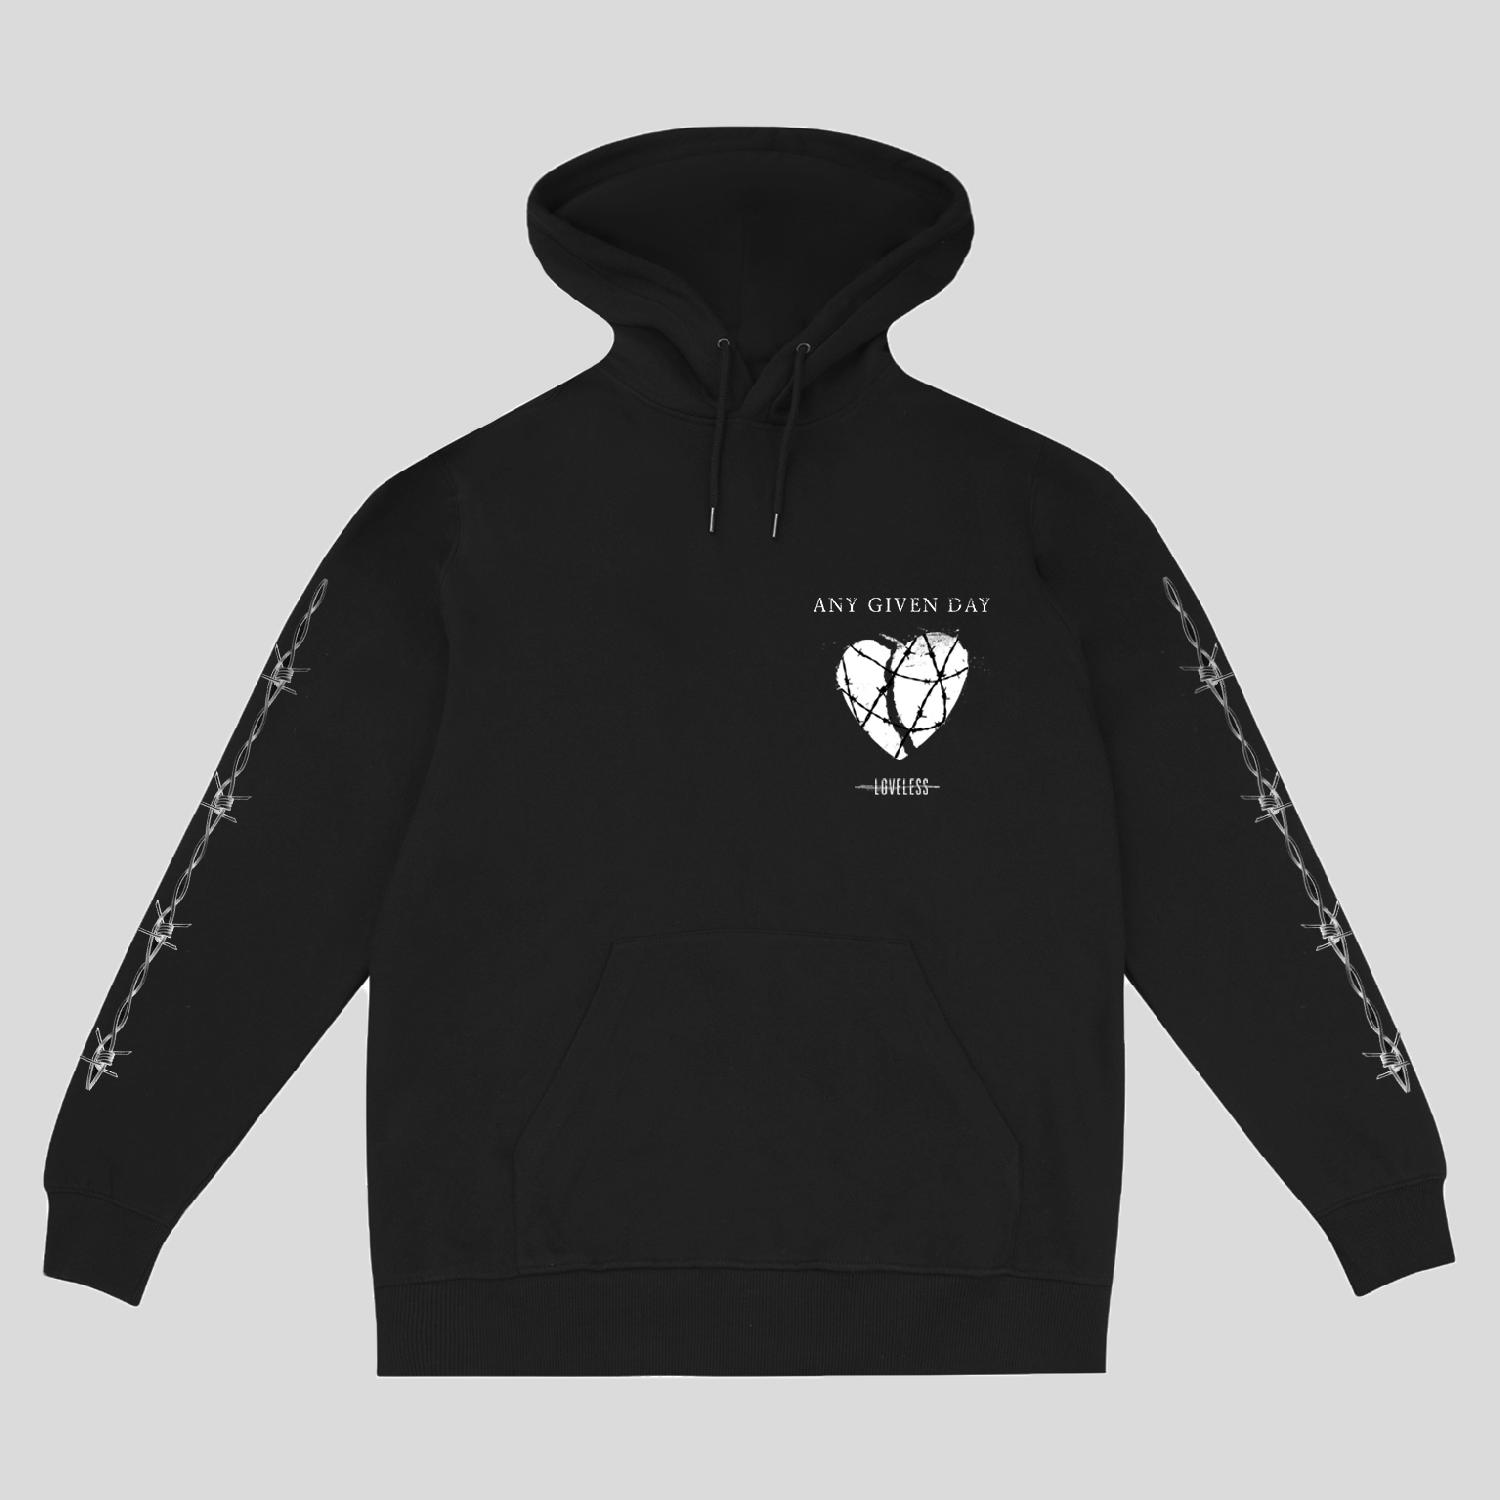 Any Given Day Loveless Hoodie, Black